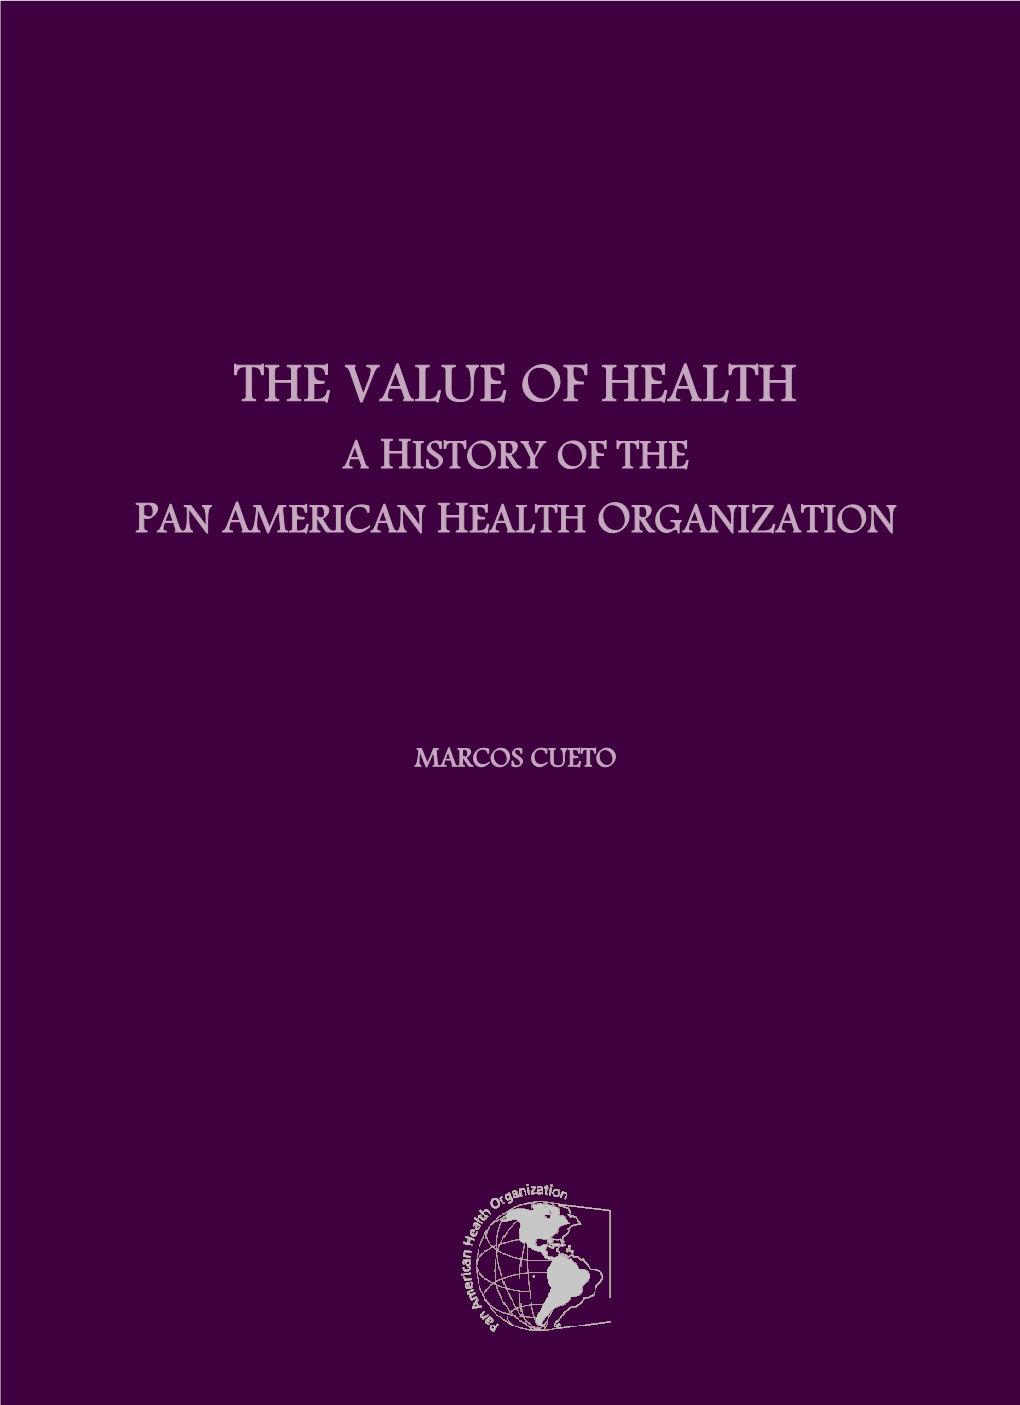 The Value of Health a History of the Pan American Health Organization